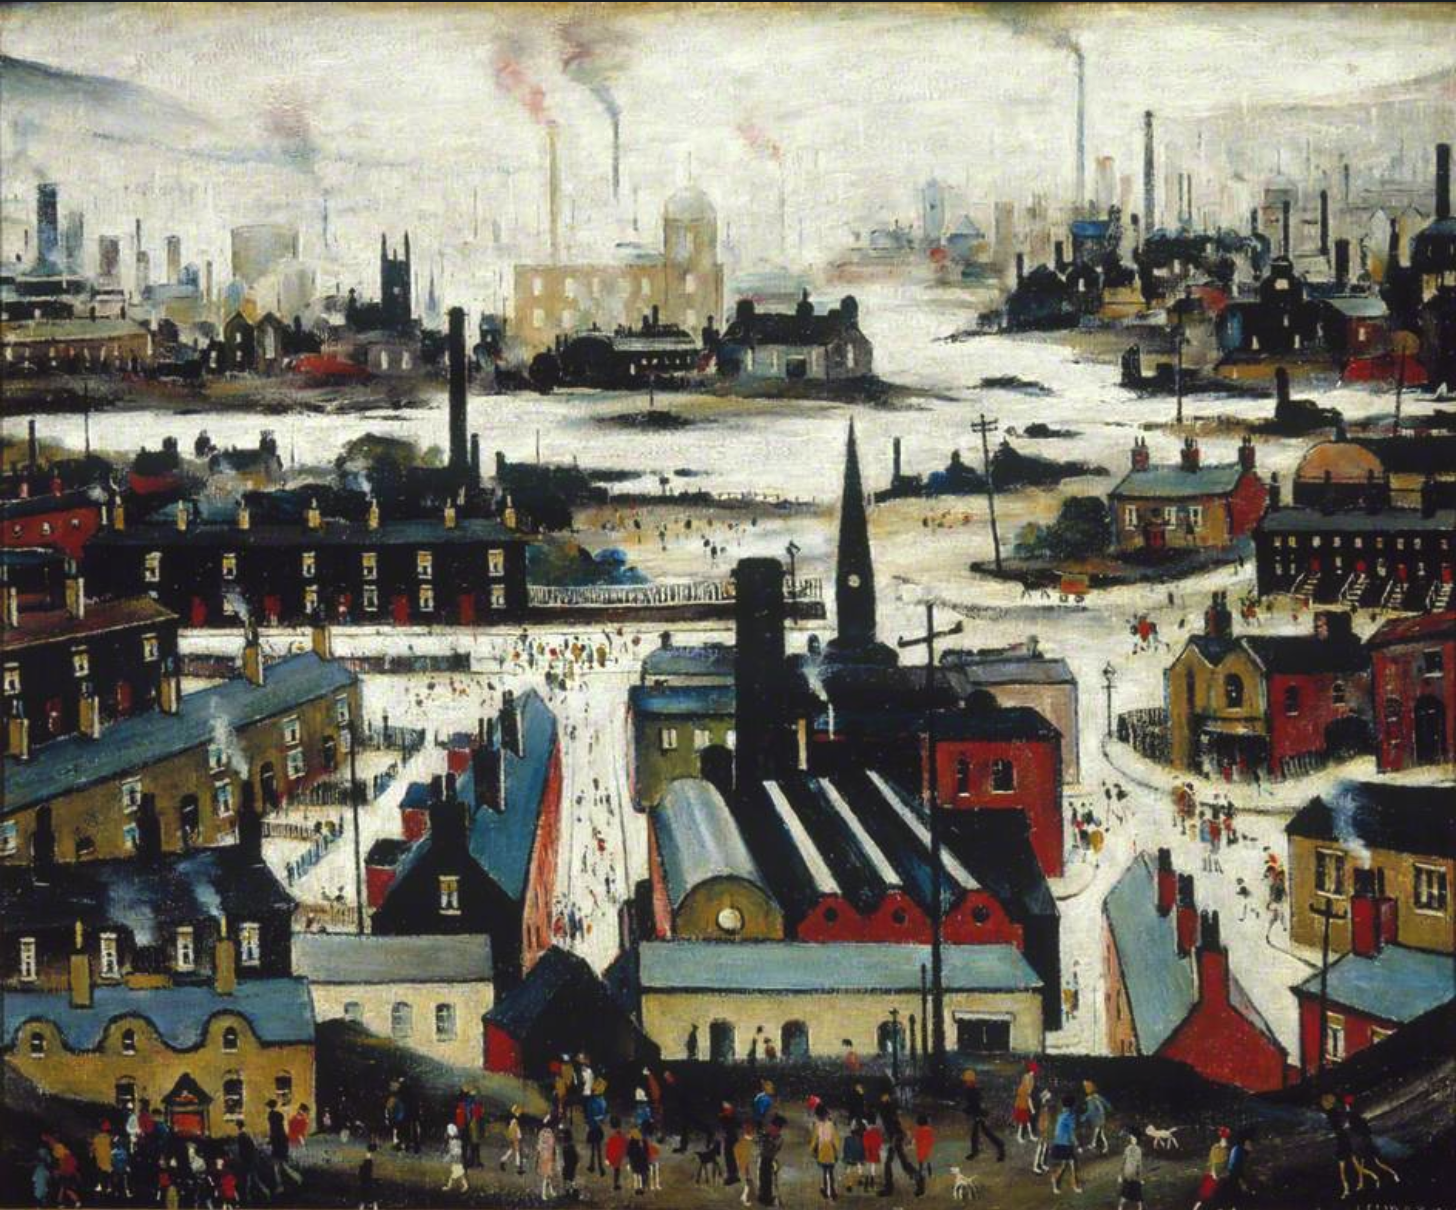 Industrial City (1948) by Laurence Stephen Lowry (1887 - 1976), English artist.